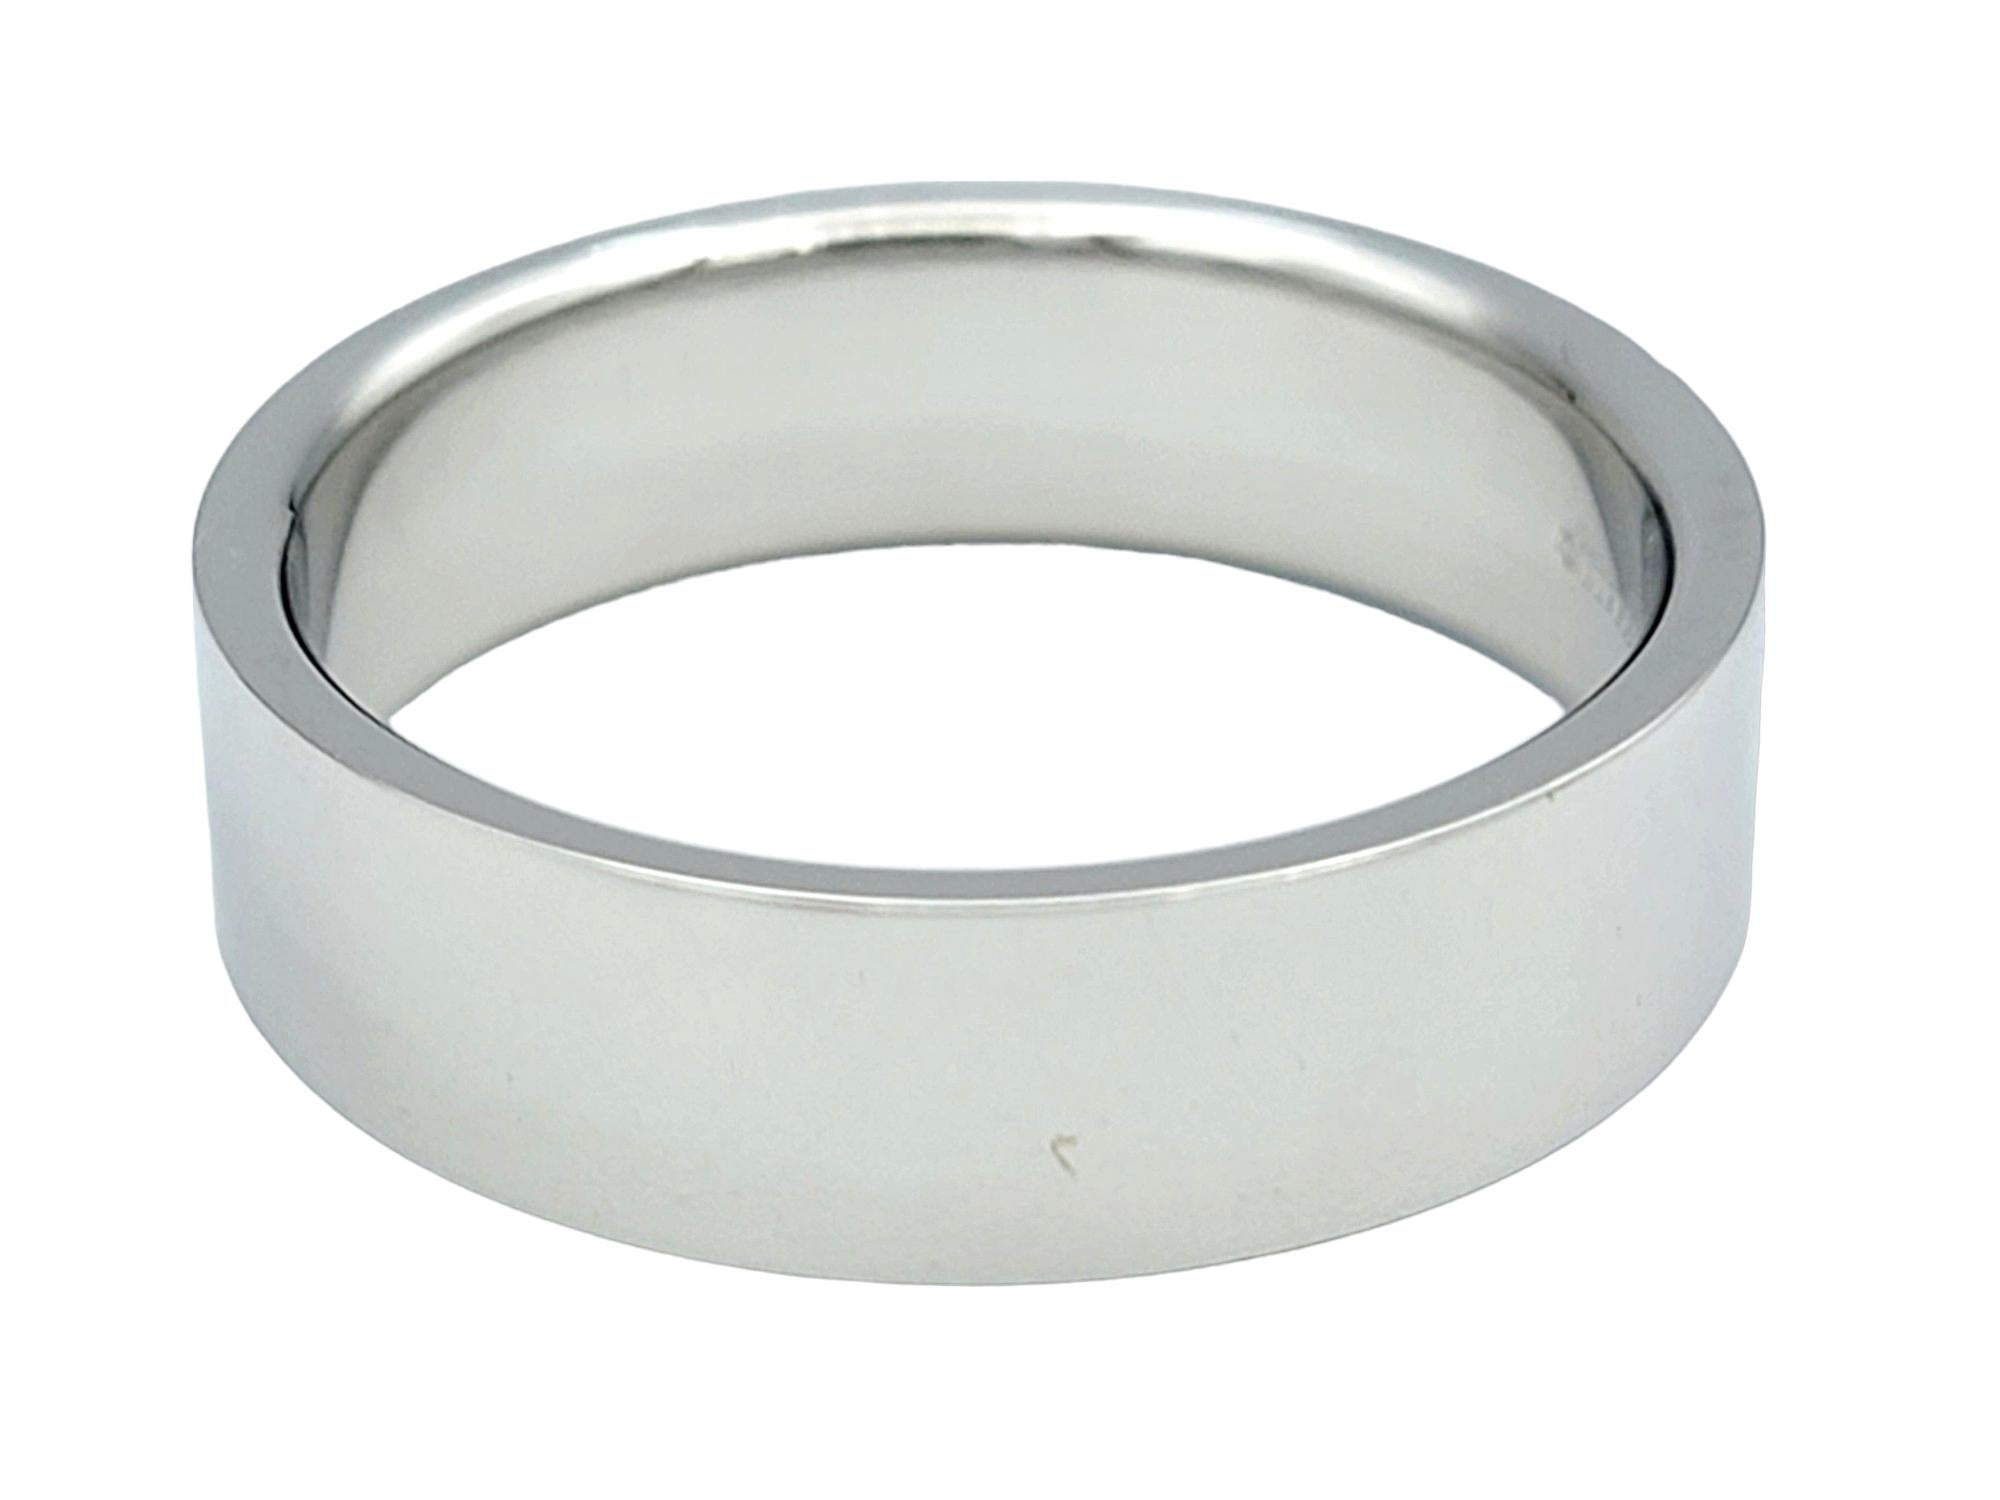 Tiffany & Co. 'Essential' Collection Unisex 6mm Band Ring in Polished Platinum In Good Condition For Sale In Scottsdale, AZ